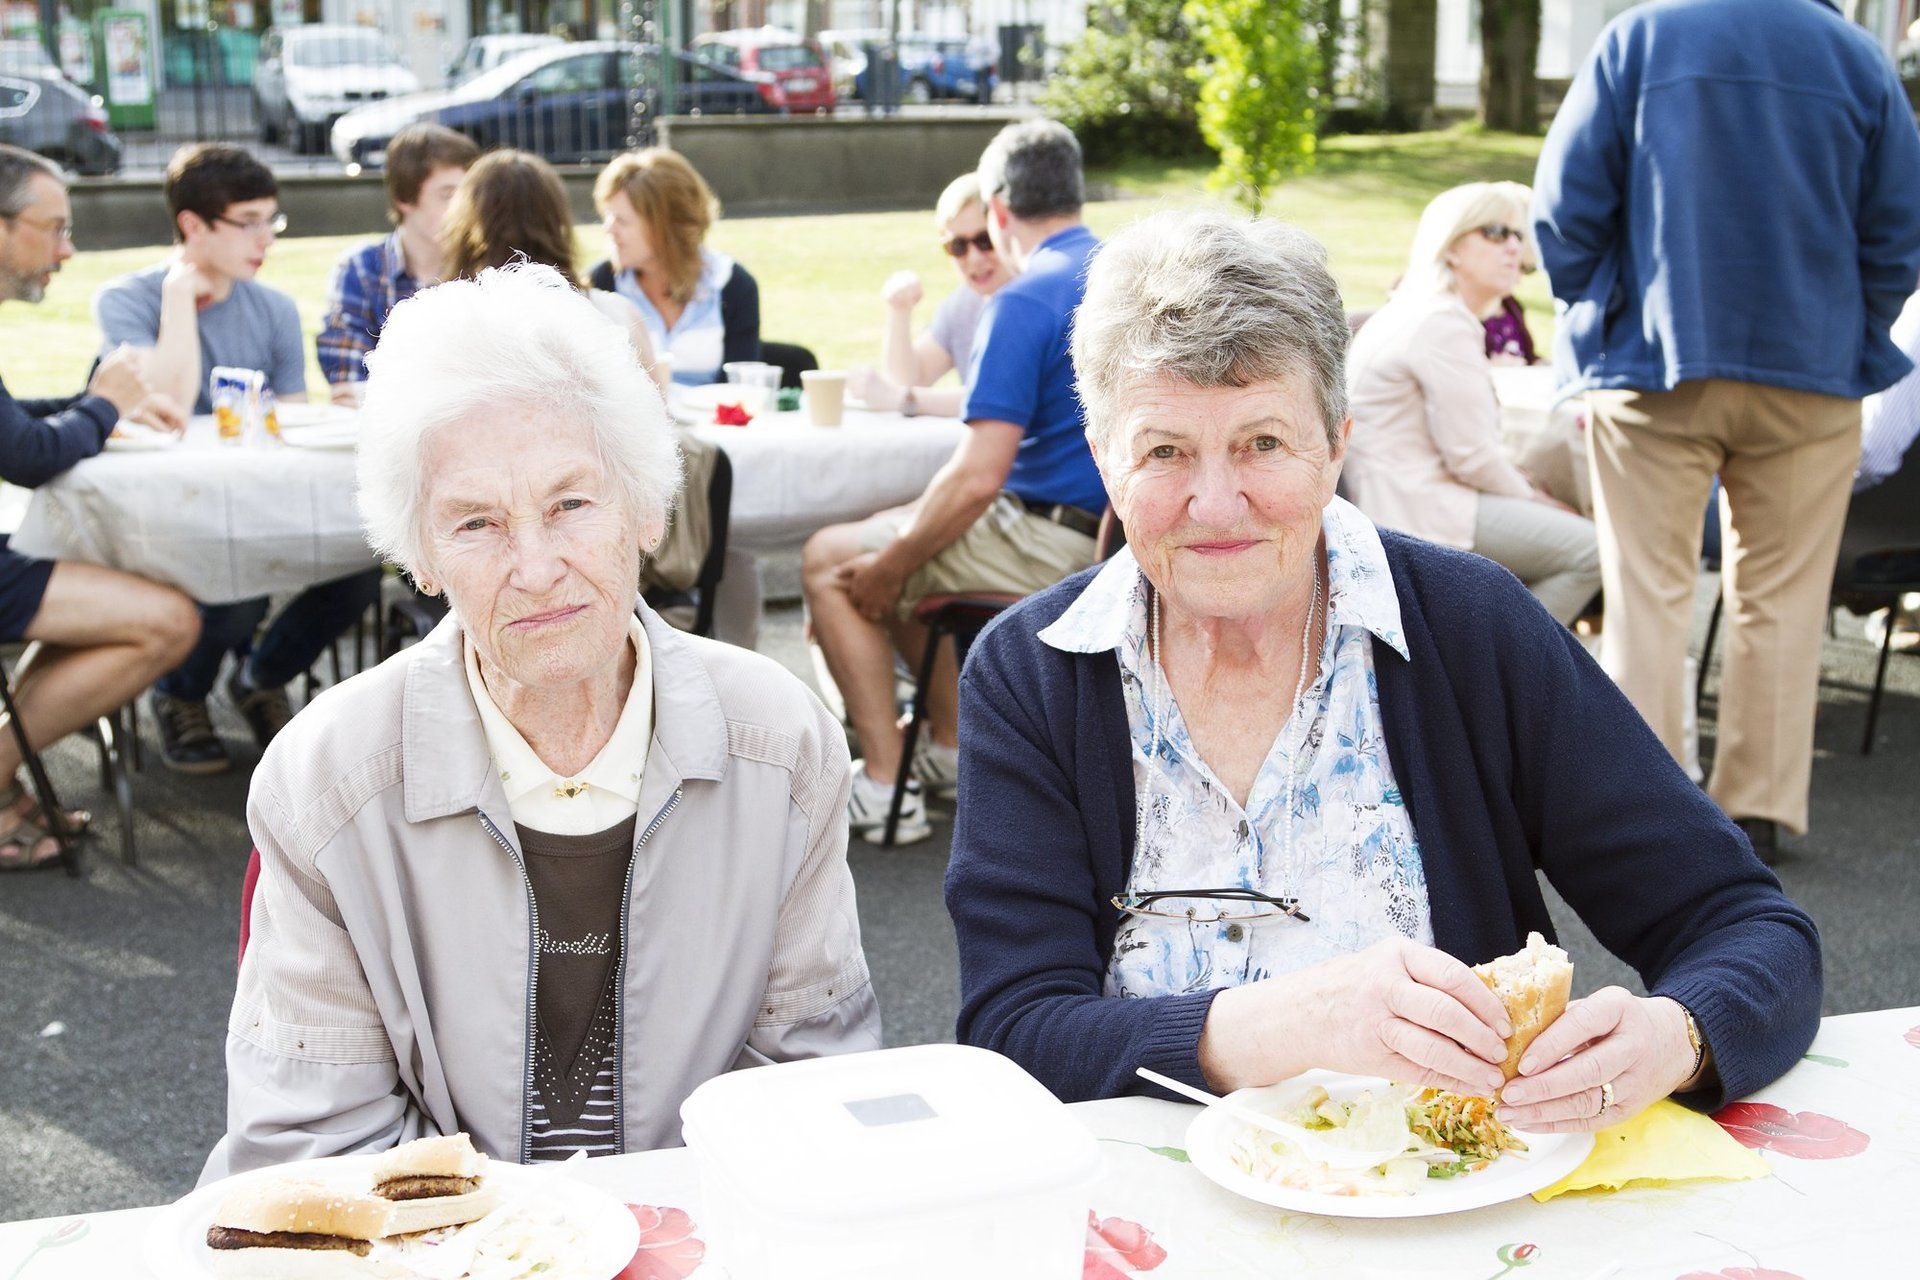 Two older women are sitting at a table eating sandwiches